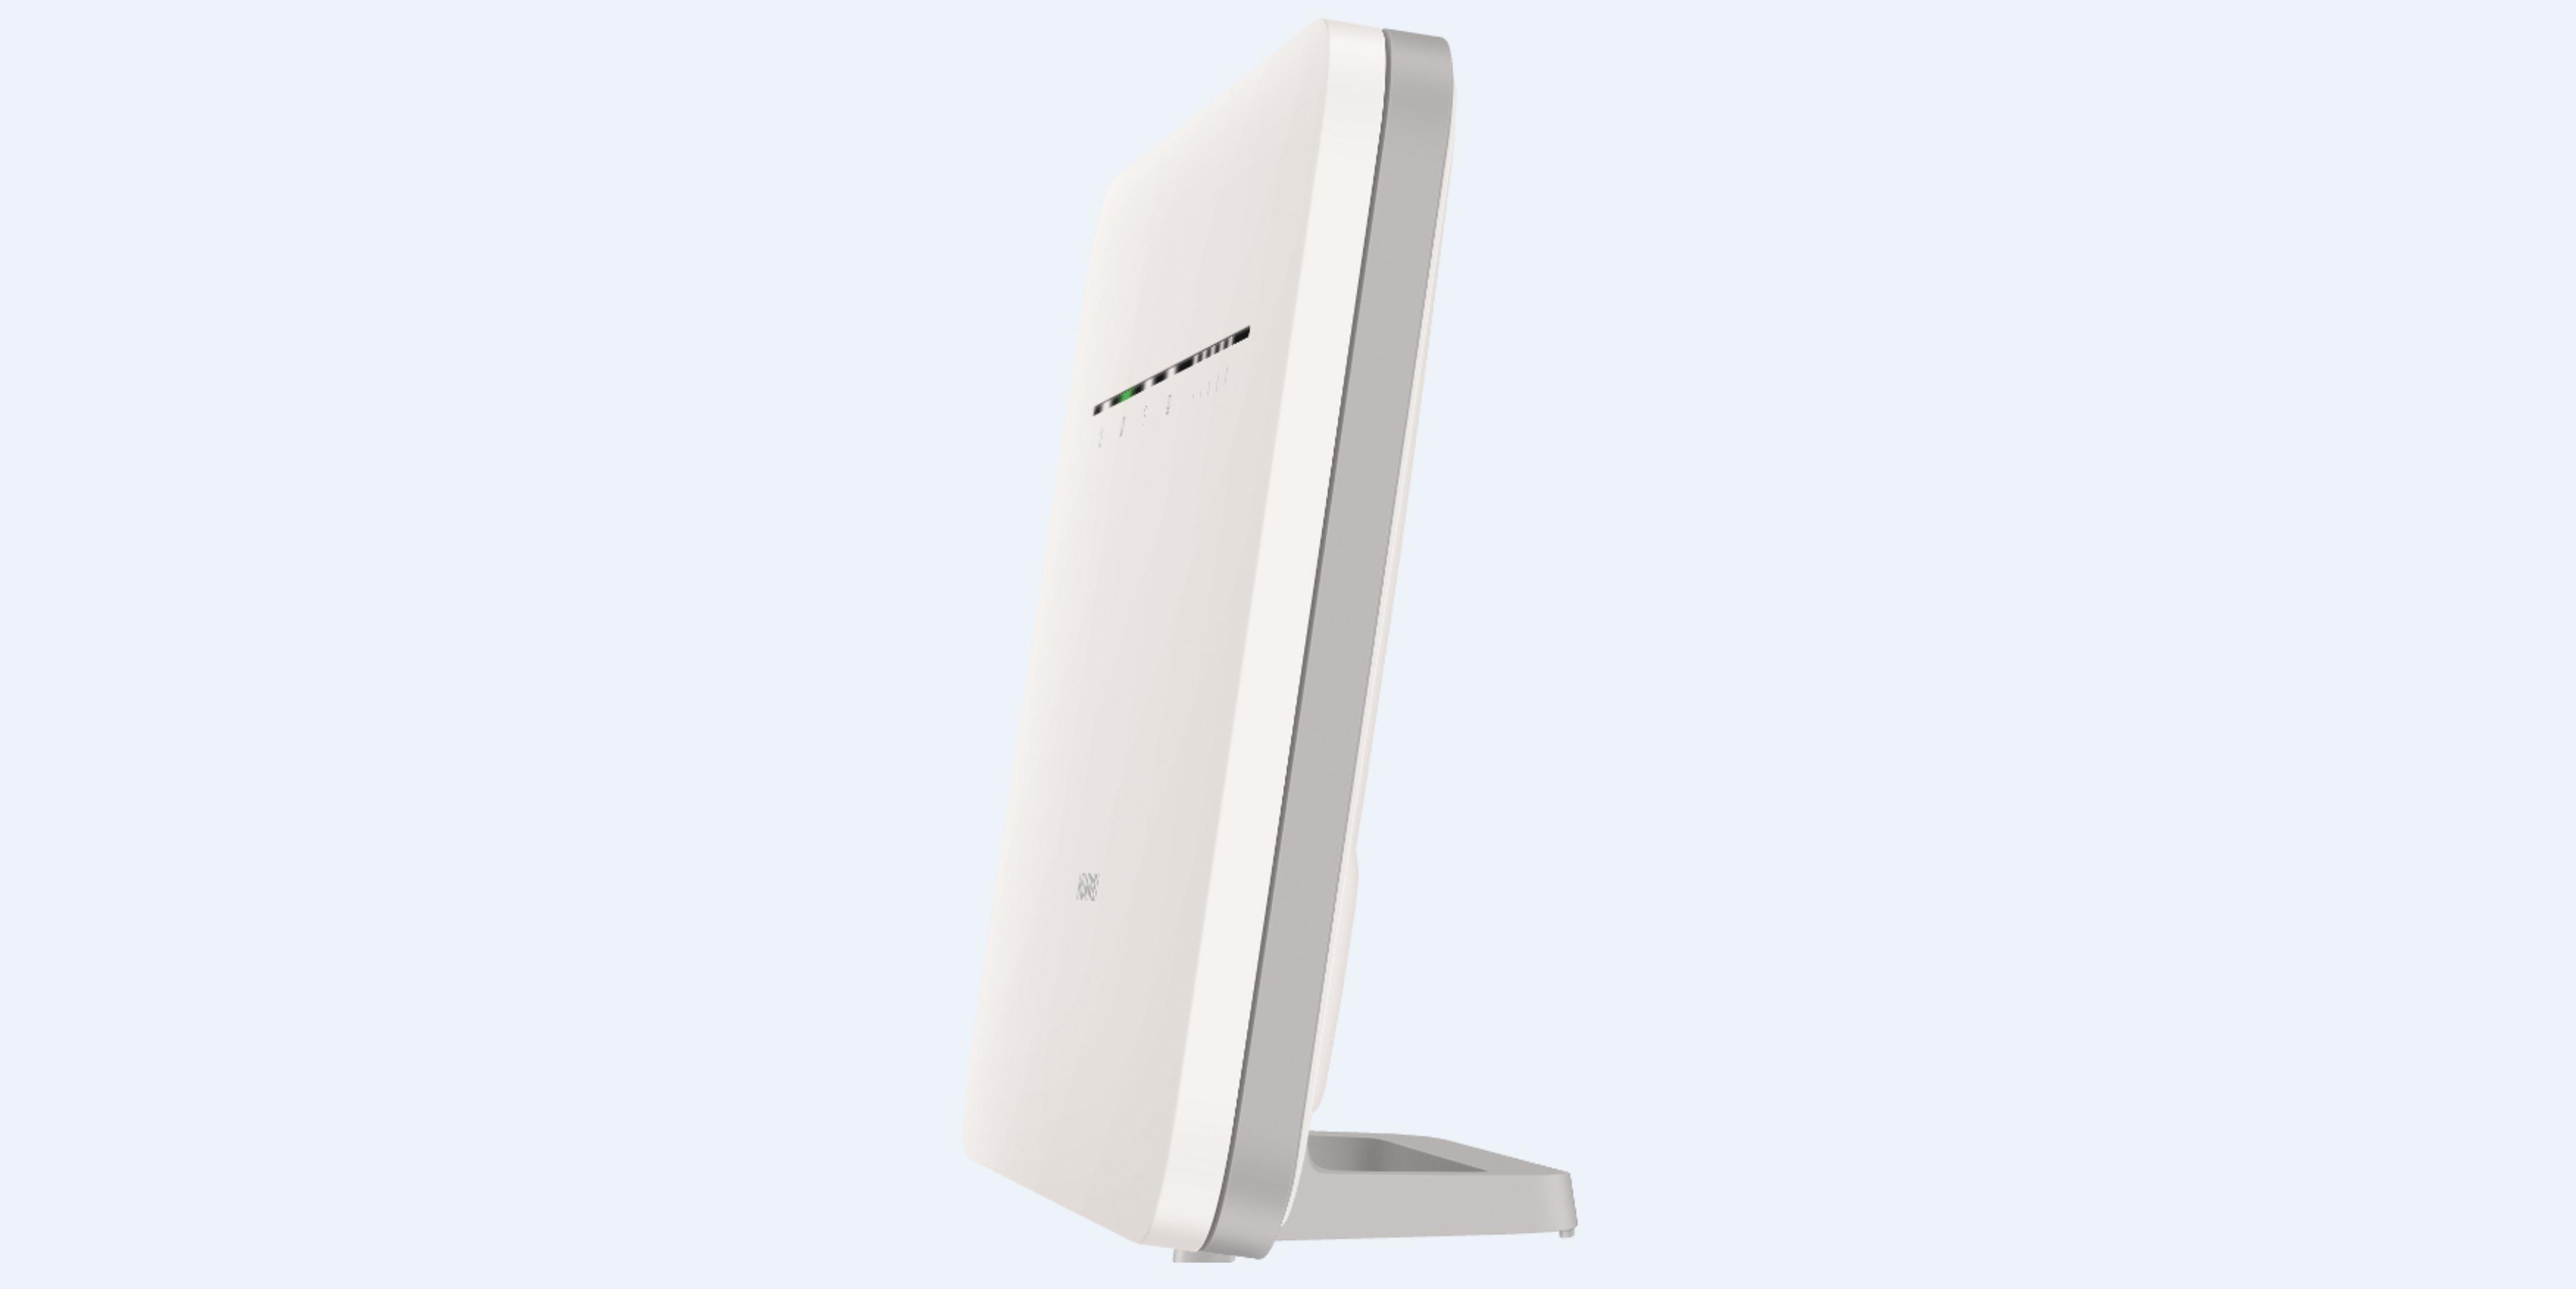 HUAWEI B535-232 4G ROUTER Router 1167 Mbit/s